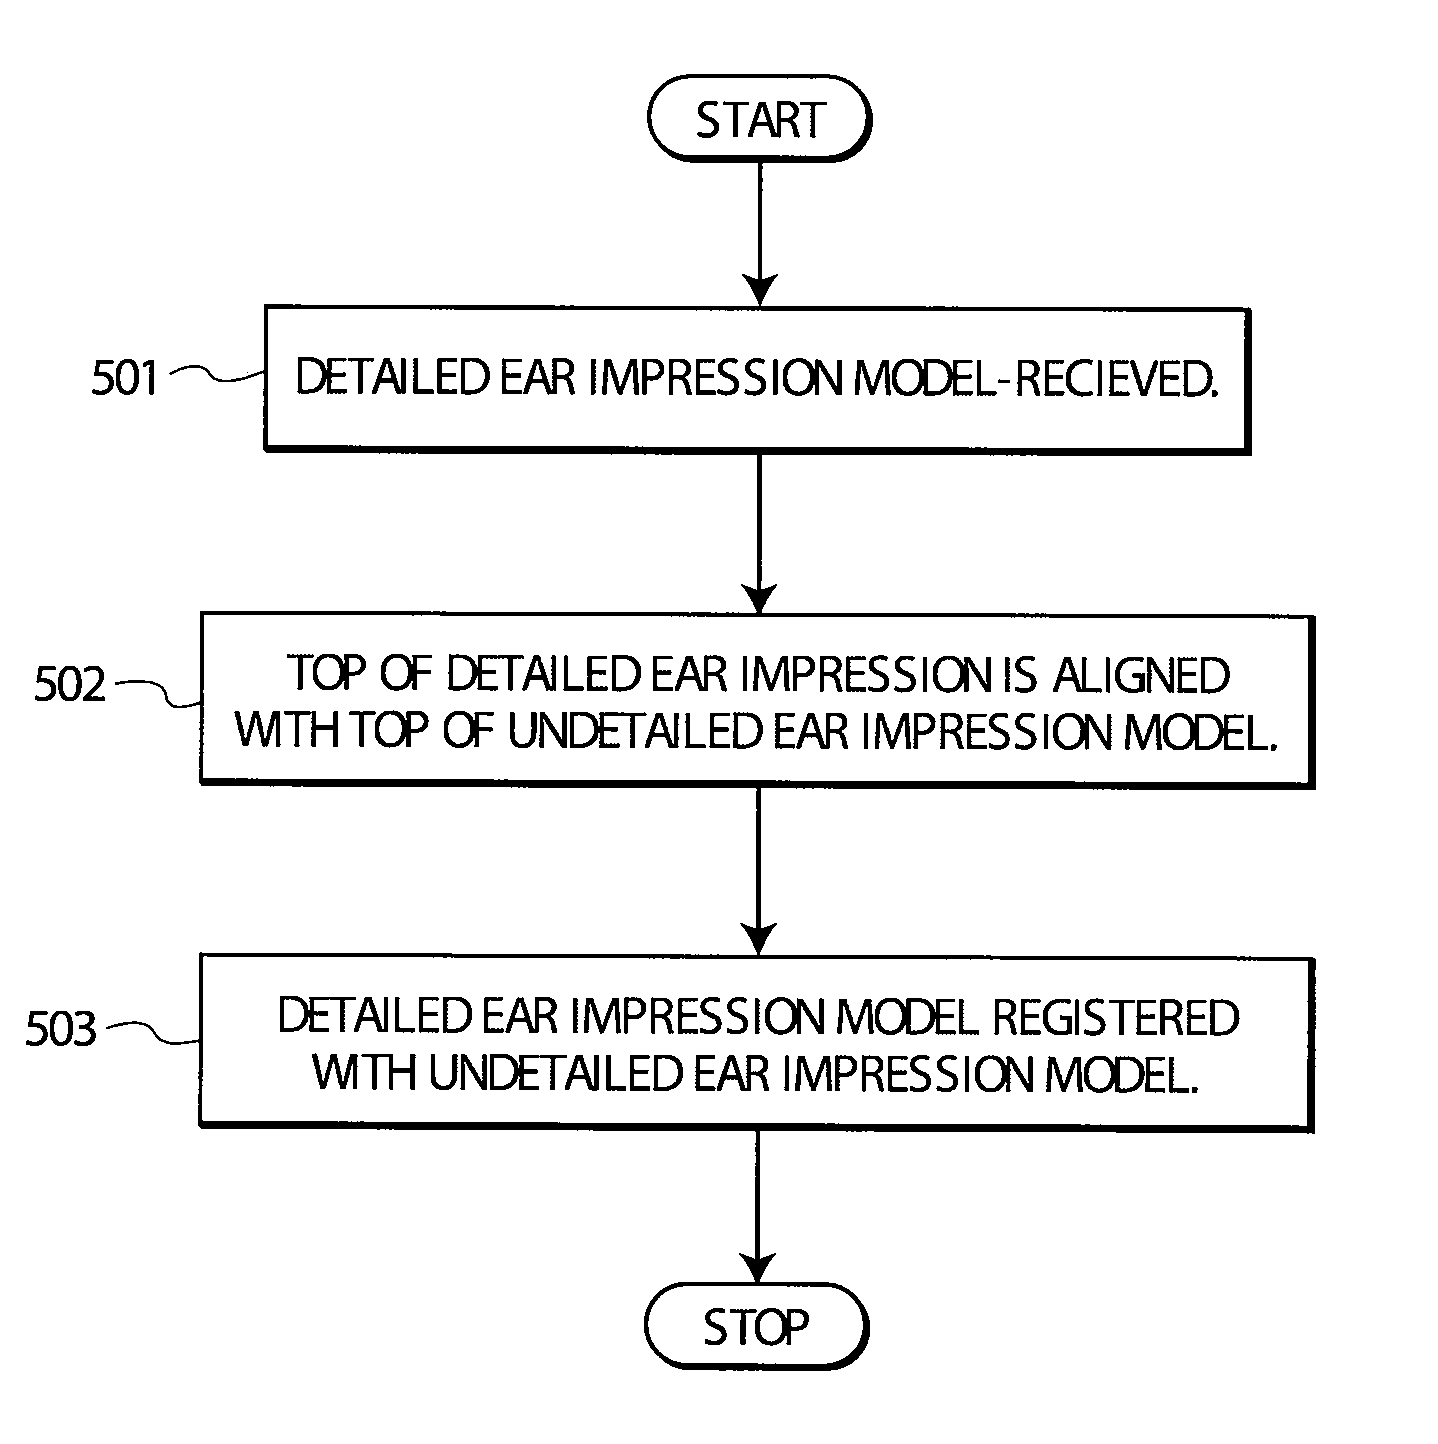 Method and apparatus for the rigid and non-rigid registration of 3D shapes